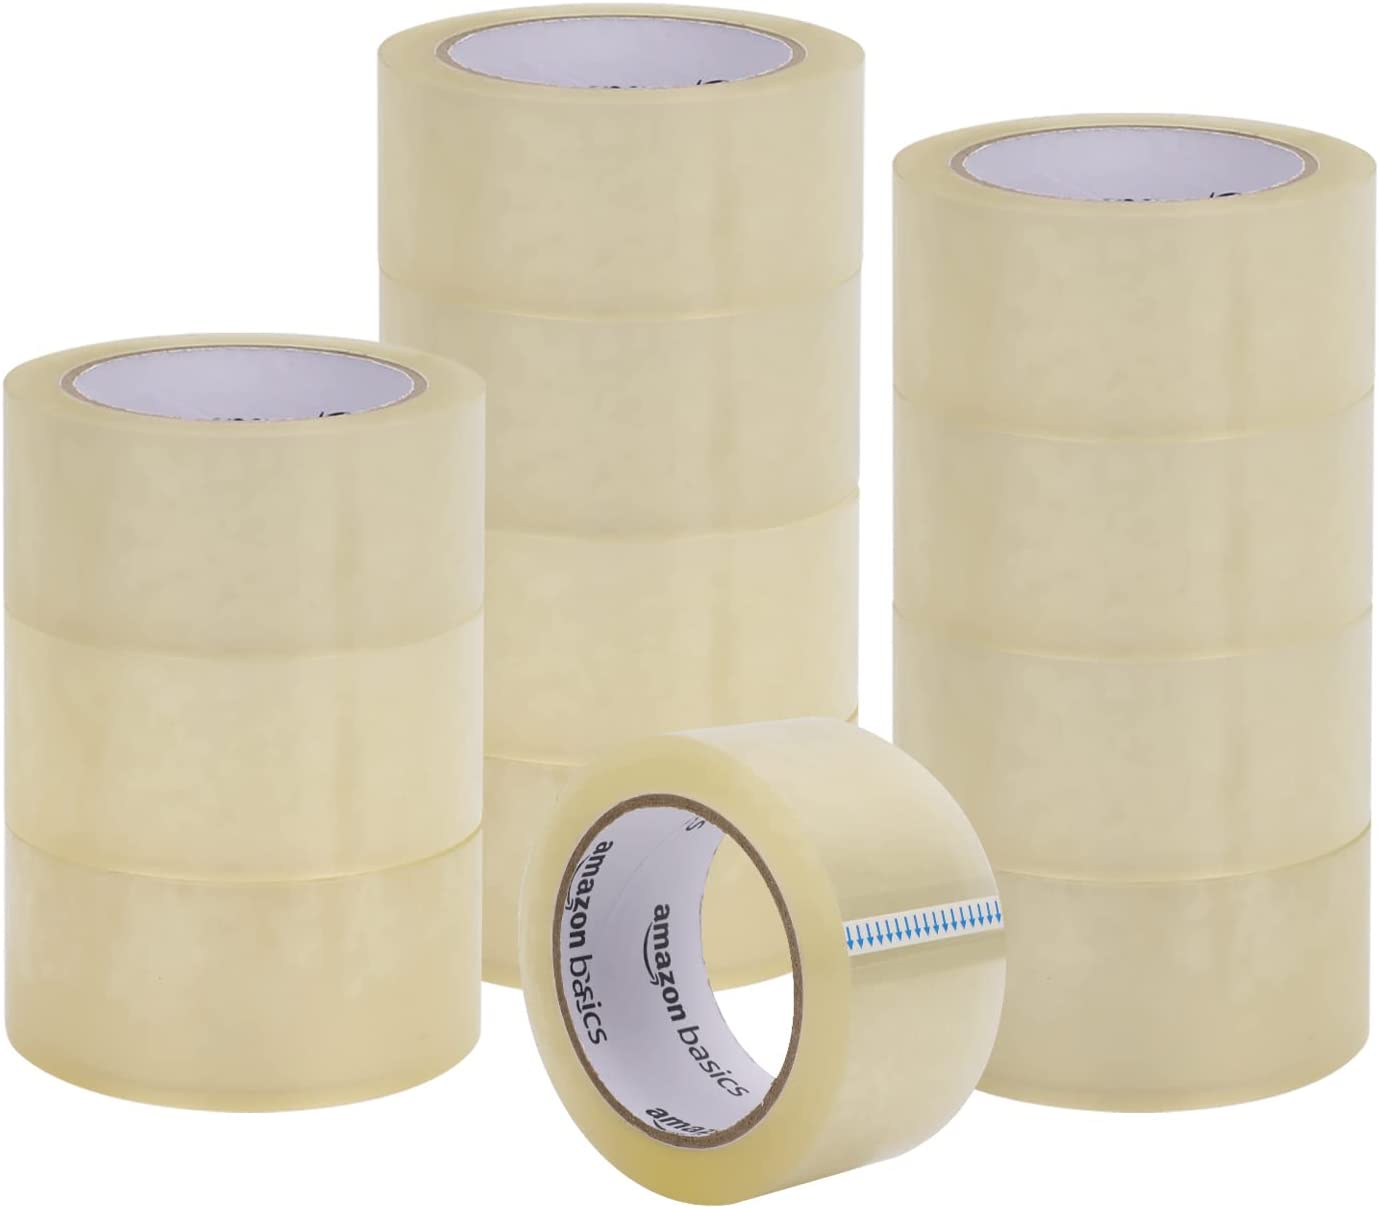 Amazon Basics Packaging Tape, 2 in x 60 yards, 2.7mil [...]